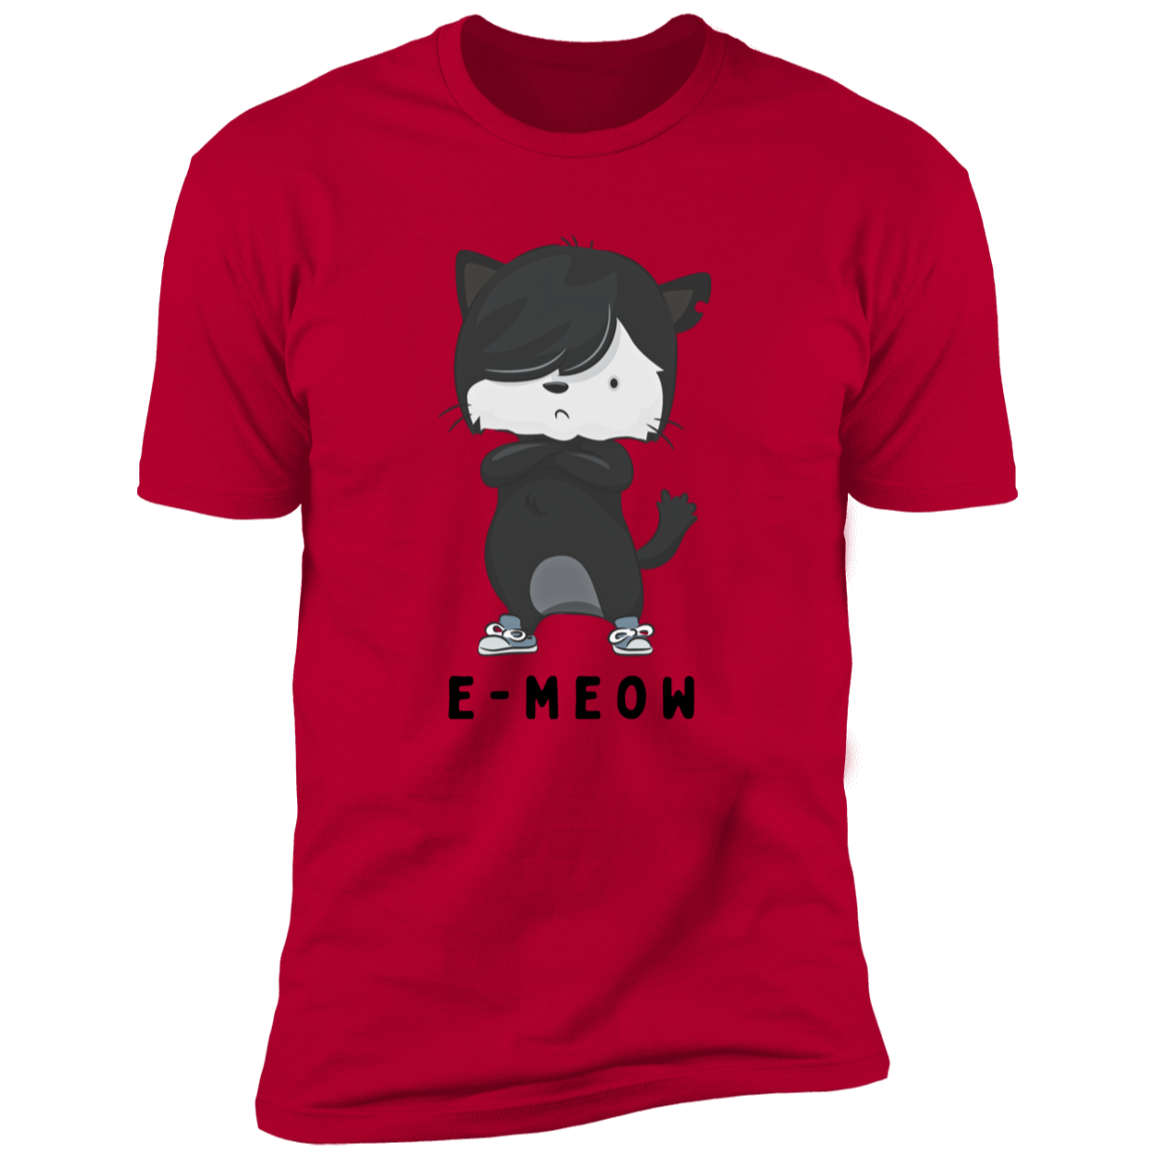 E-meow cat shirt, funny cat shirt for humans, cat mom and cat dad shirt, in red